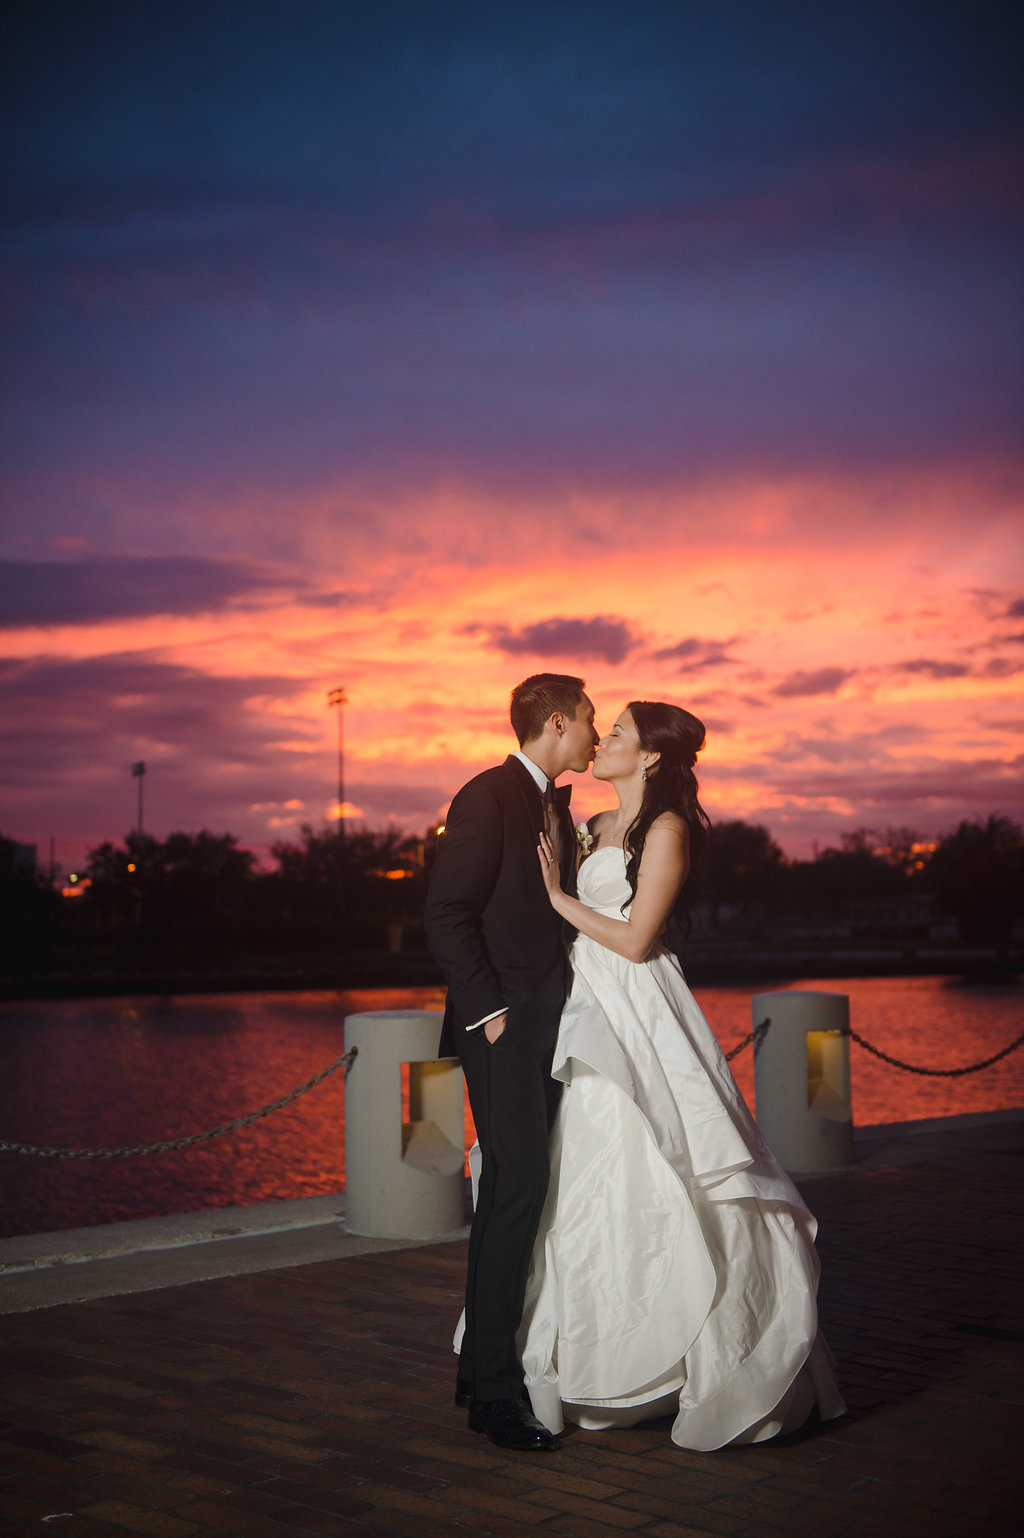 Downtown Tampa Riverwalk Outdoor Sunset Bride and Groom Intimate Wedding Portrait | Tampa Bay Photographer Marc Edwards Photographs